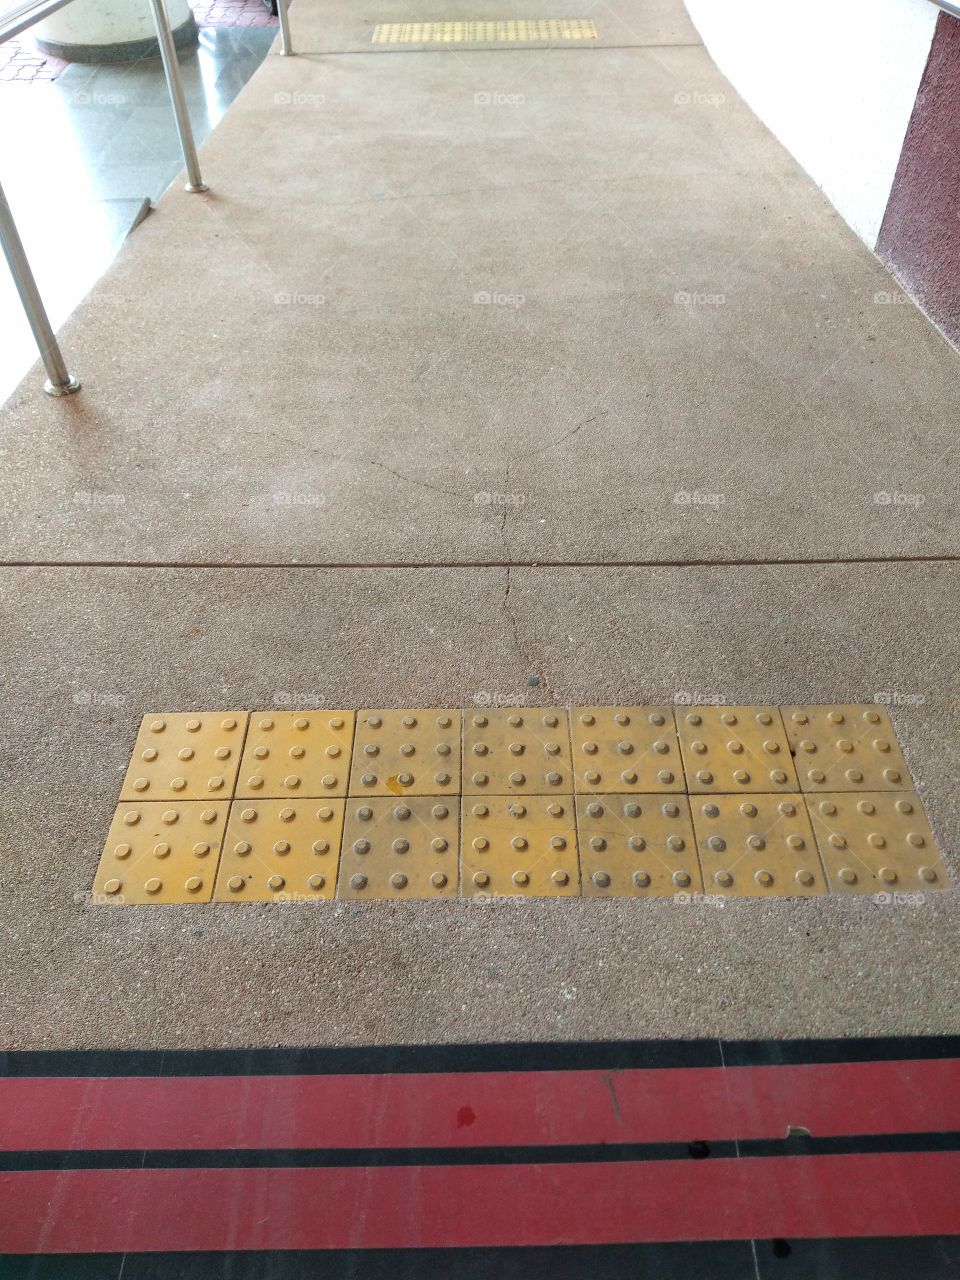 The surface of the path of the wheelchair with anti-slip pads on the slope to prevent accidents.